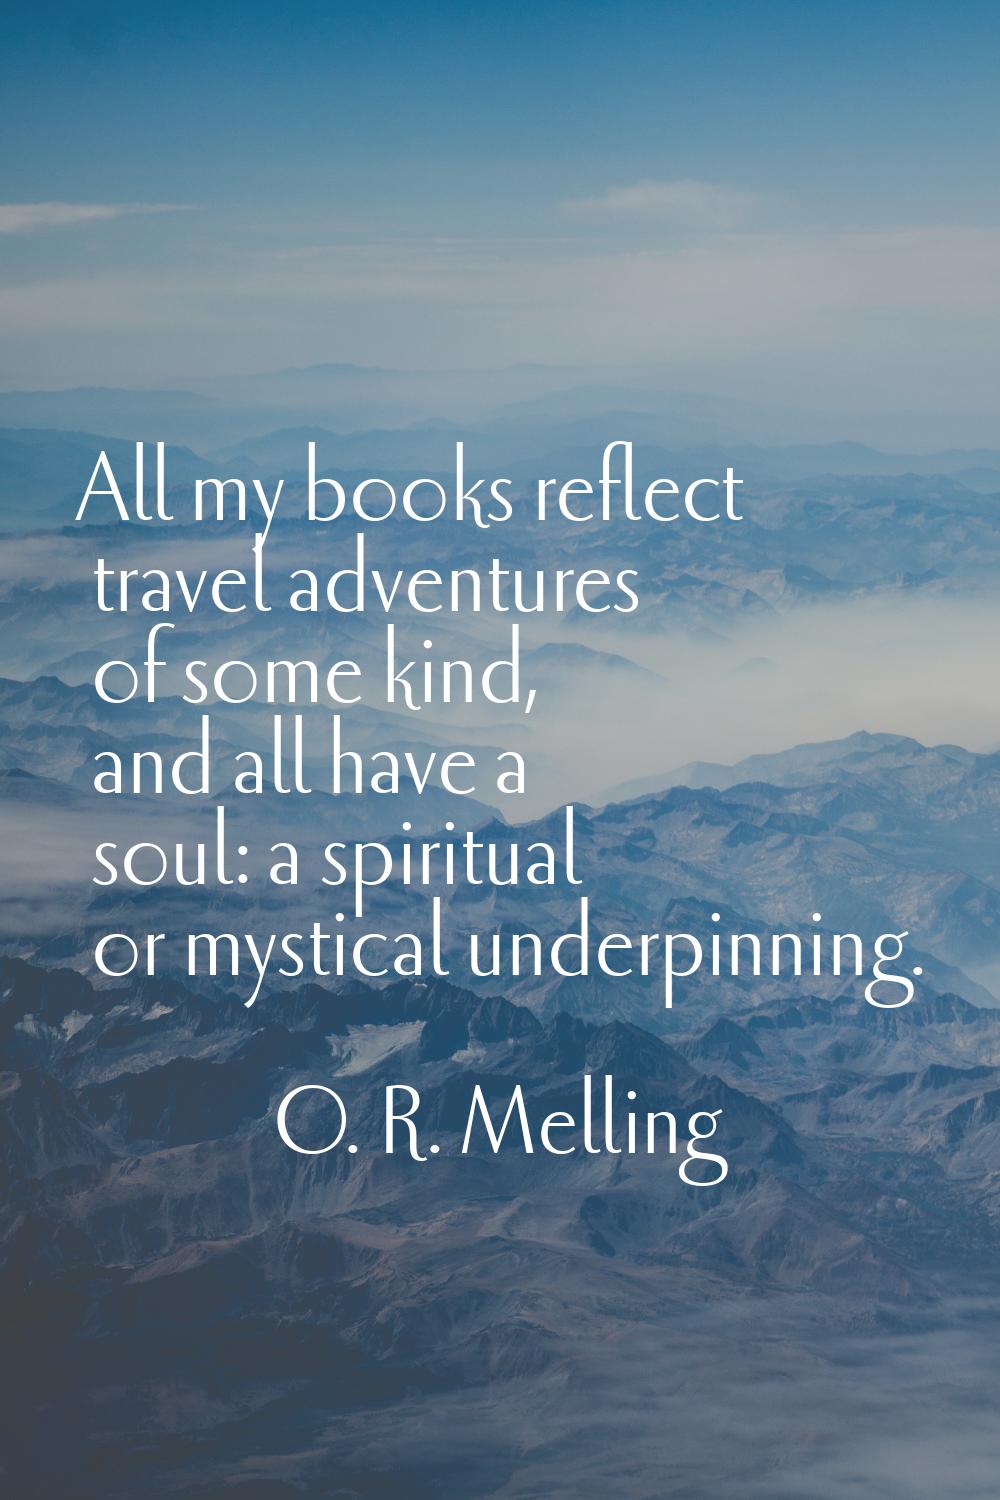 All my books reflect travel adventures of some kind, and all have a soul: a spiritual or mystical u